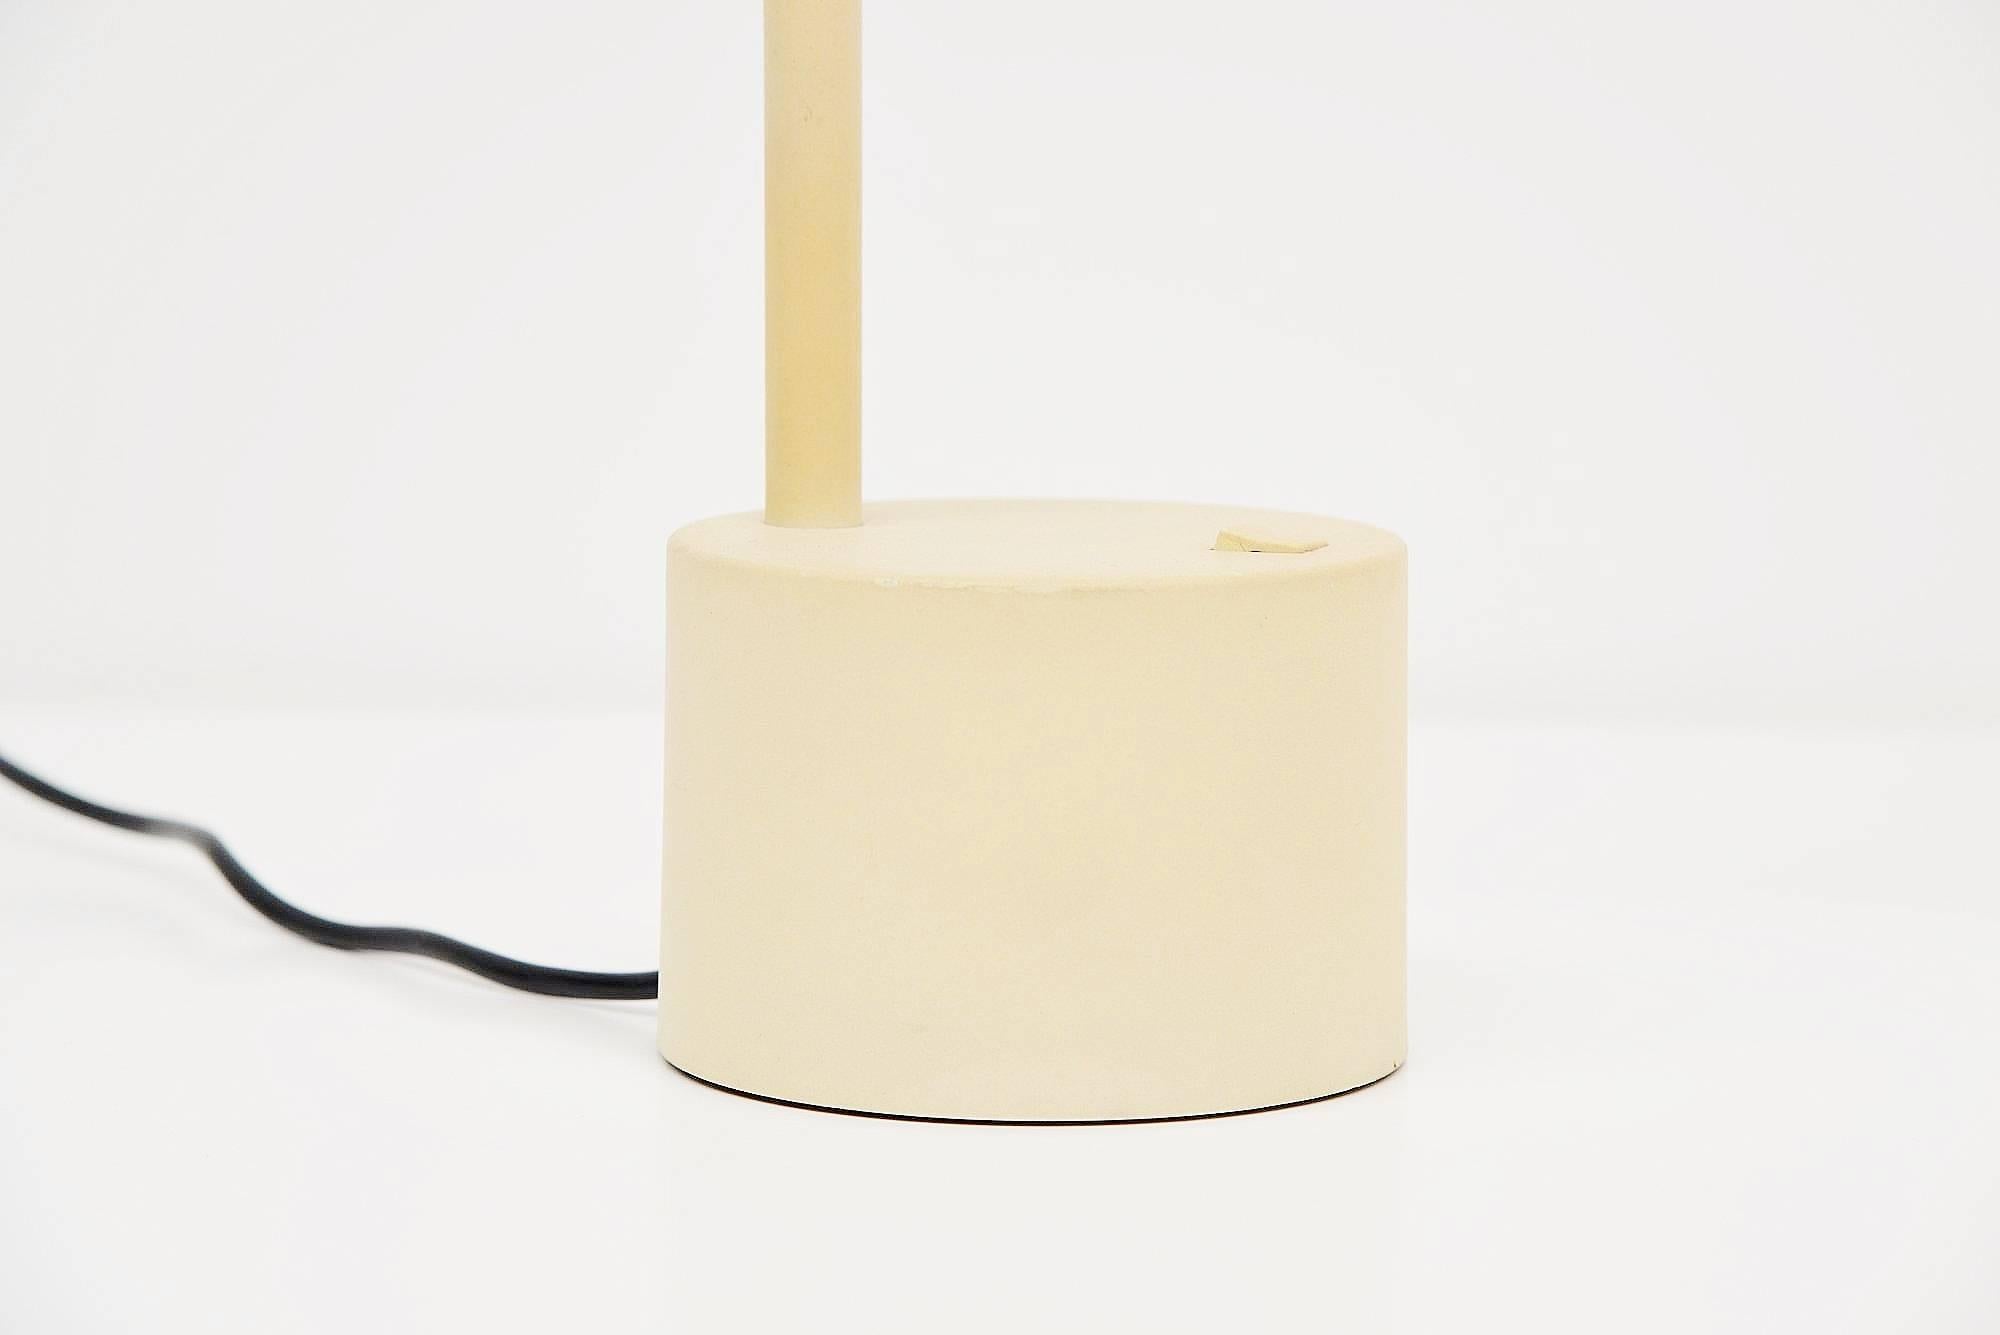 Rare ‘Halo Click 2’ table lamp designed by Ettore Sottsass for Philips, Holland 1988. This rare off-white table lamp was designed by Ettore Sottsass for the Dutch market and therefore it’s very hard to find outside Holland. This table lamp version